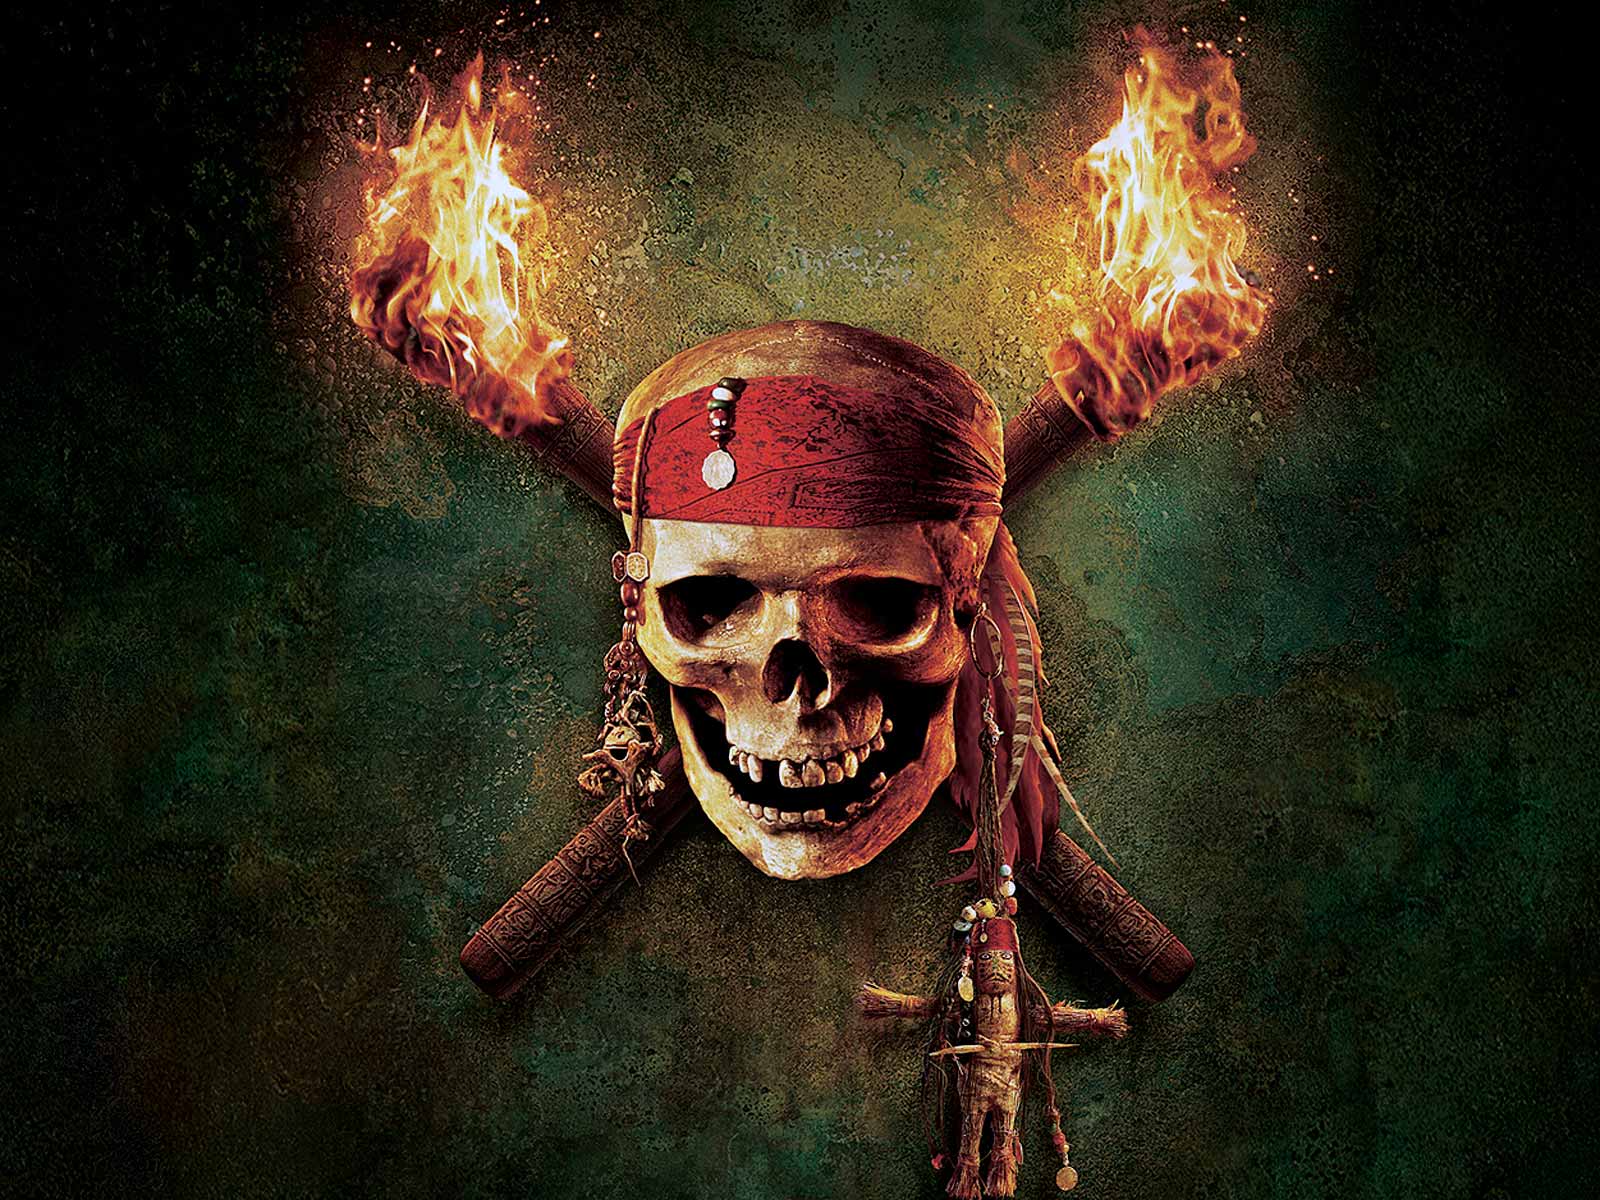 Pirates Of The Caribbean Wallpaper Images #8680 Wallpaper | High ...